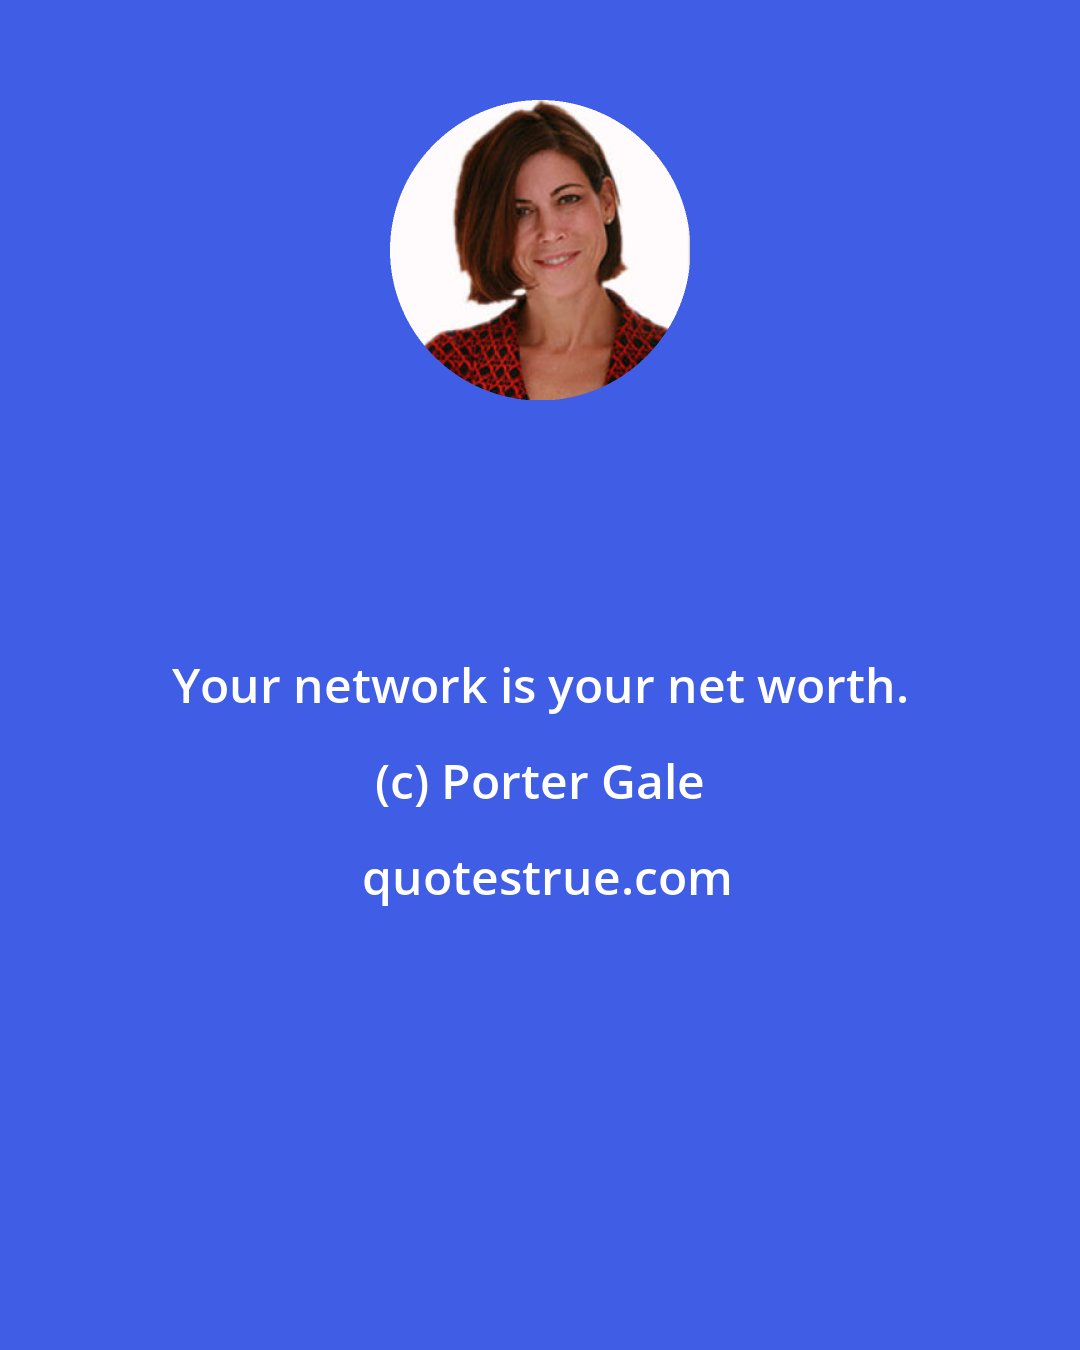 Porter Gale: Your network is your net worth.